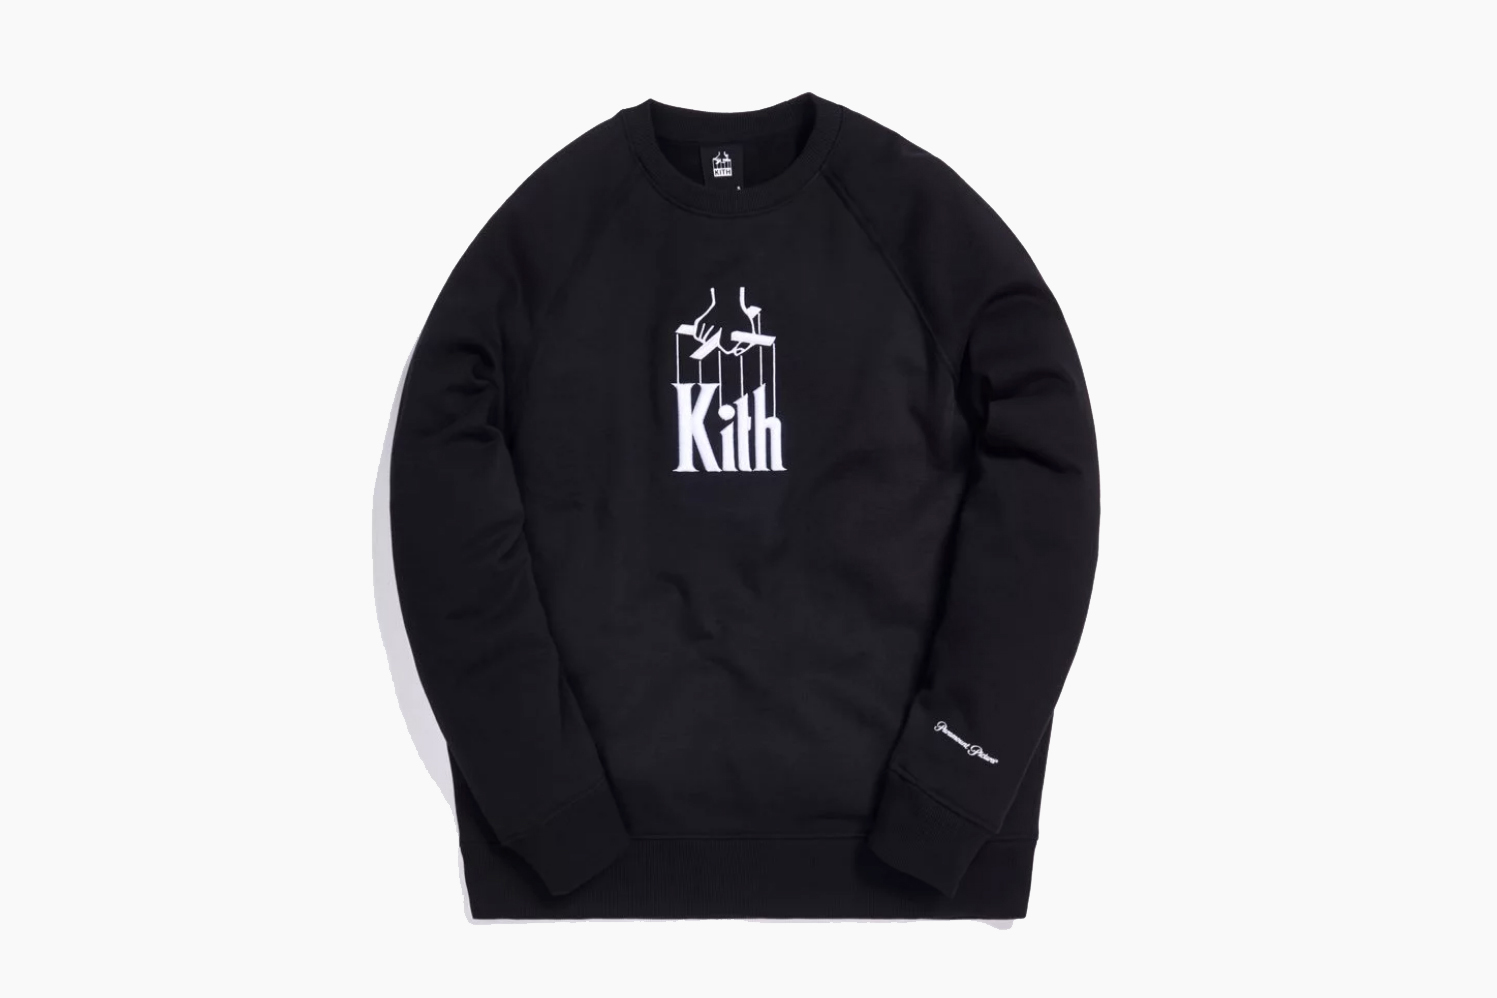 'The Godfather' x KITH Capsule